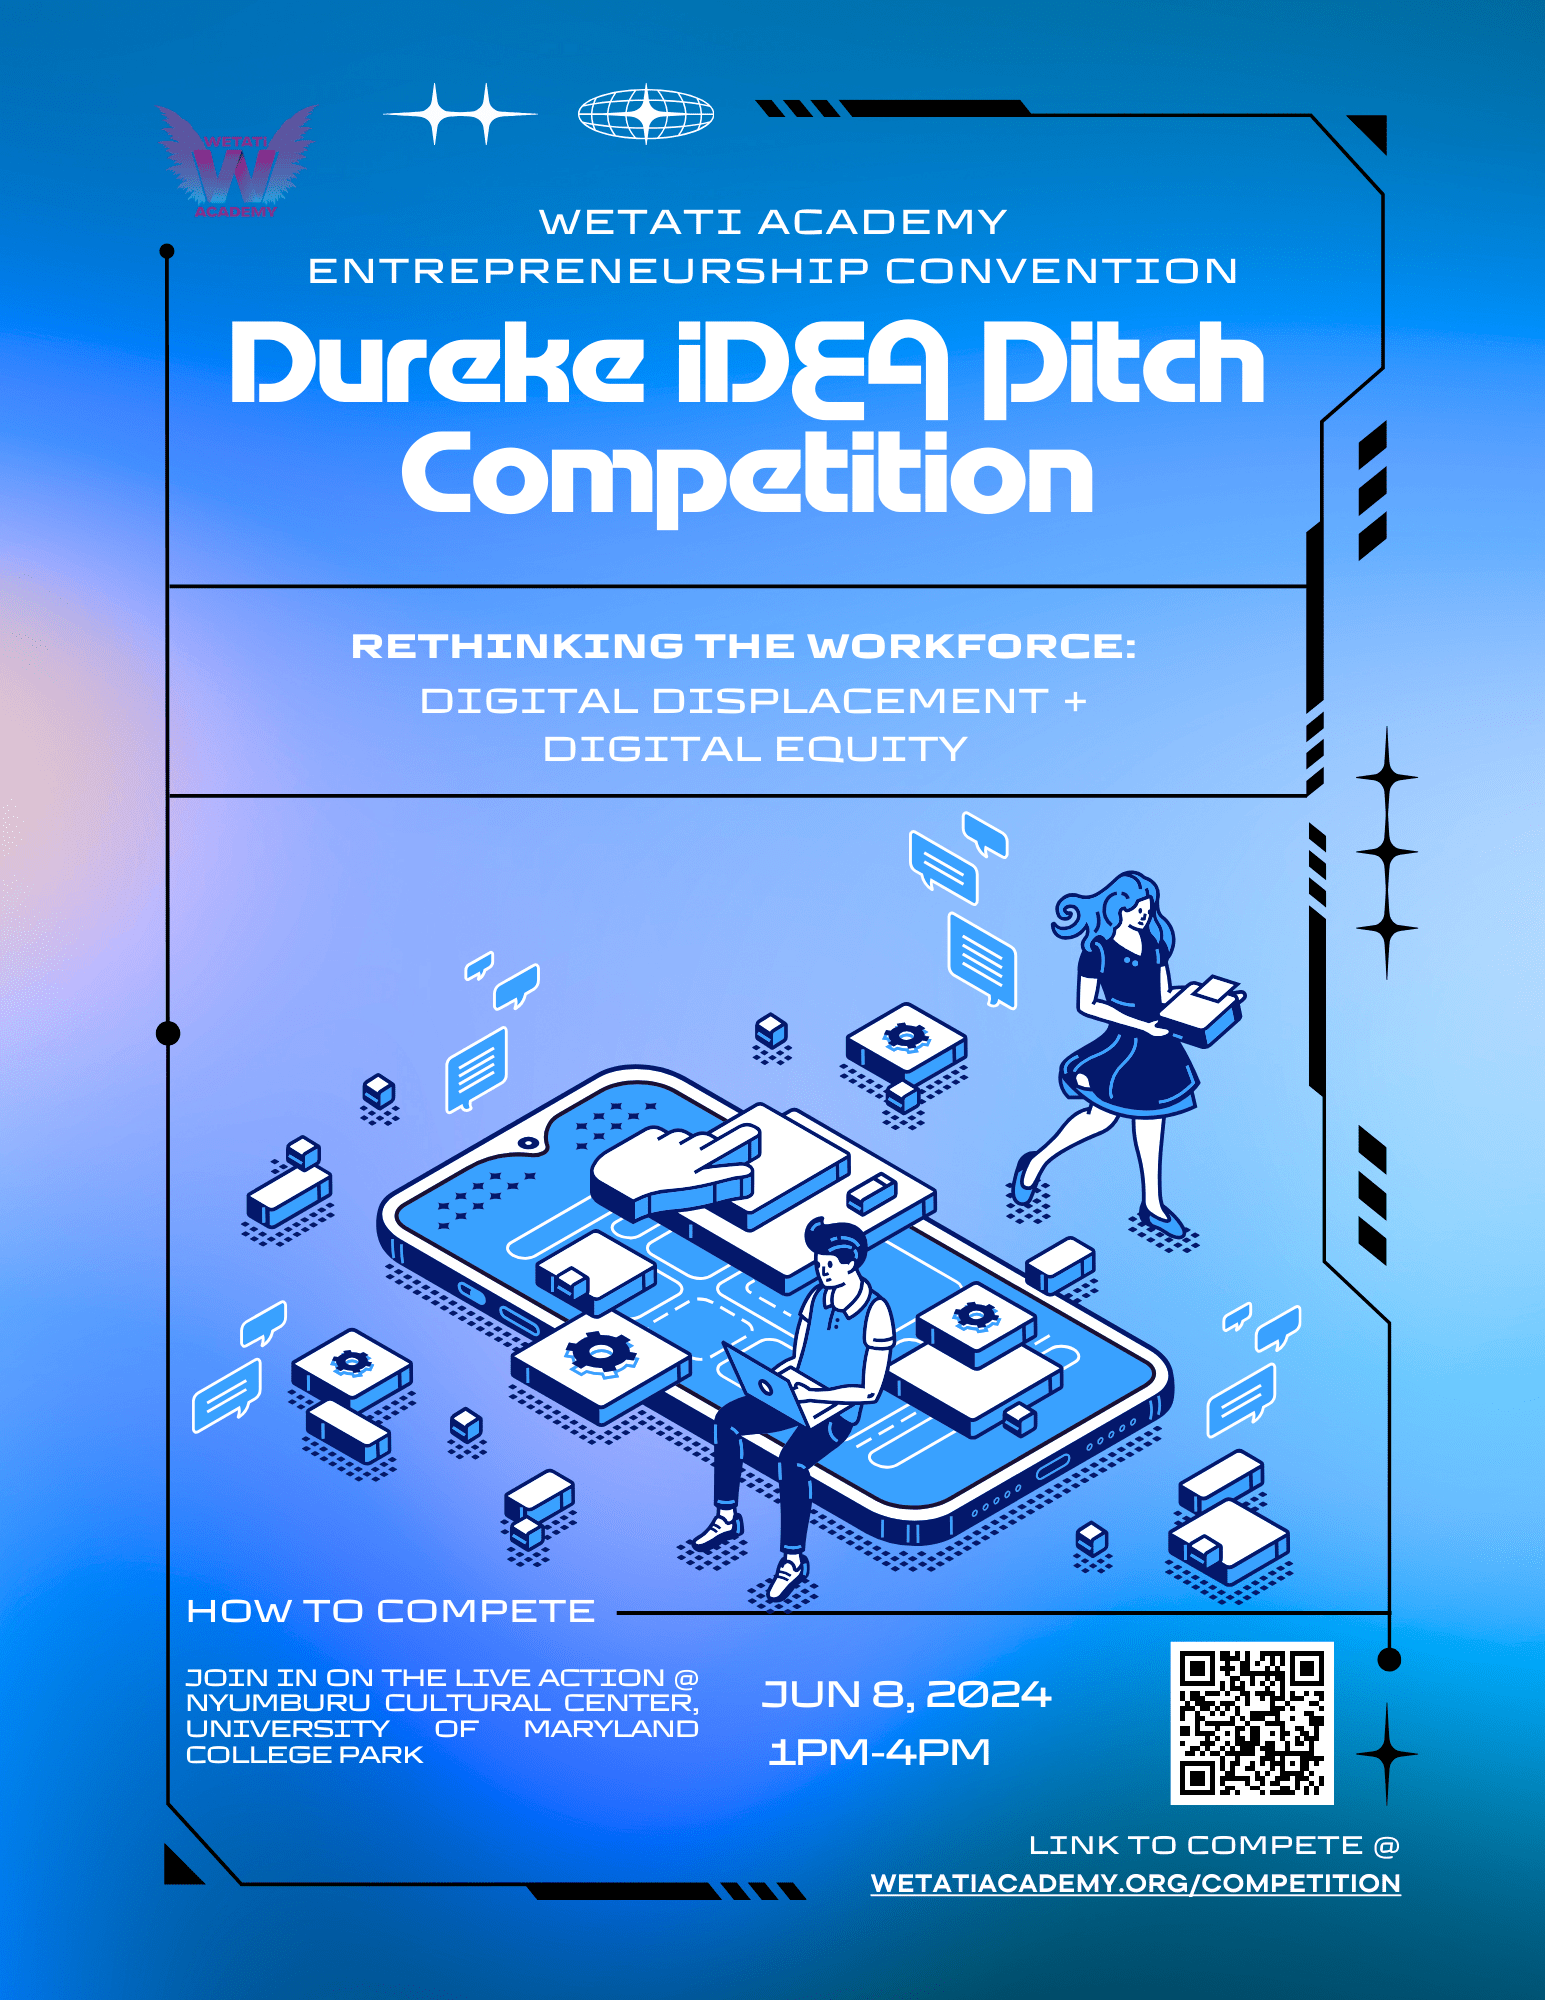 Dureke iDEA Pitch Competition